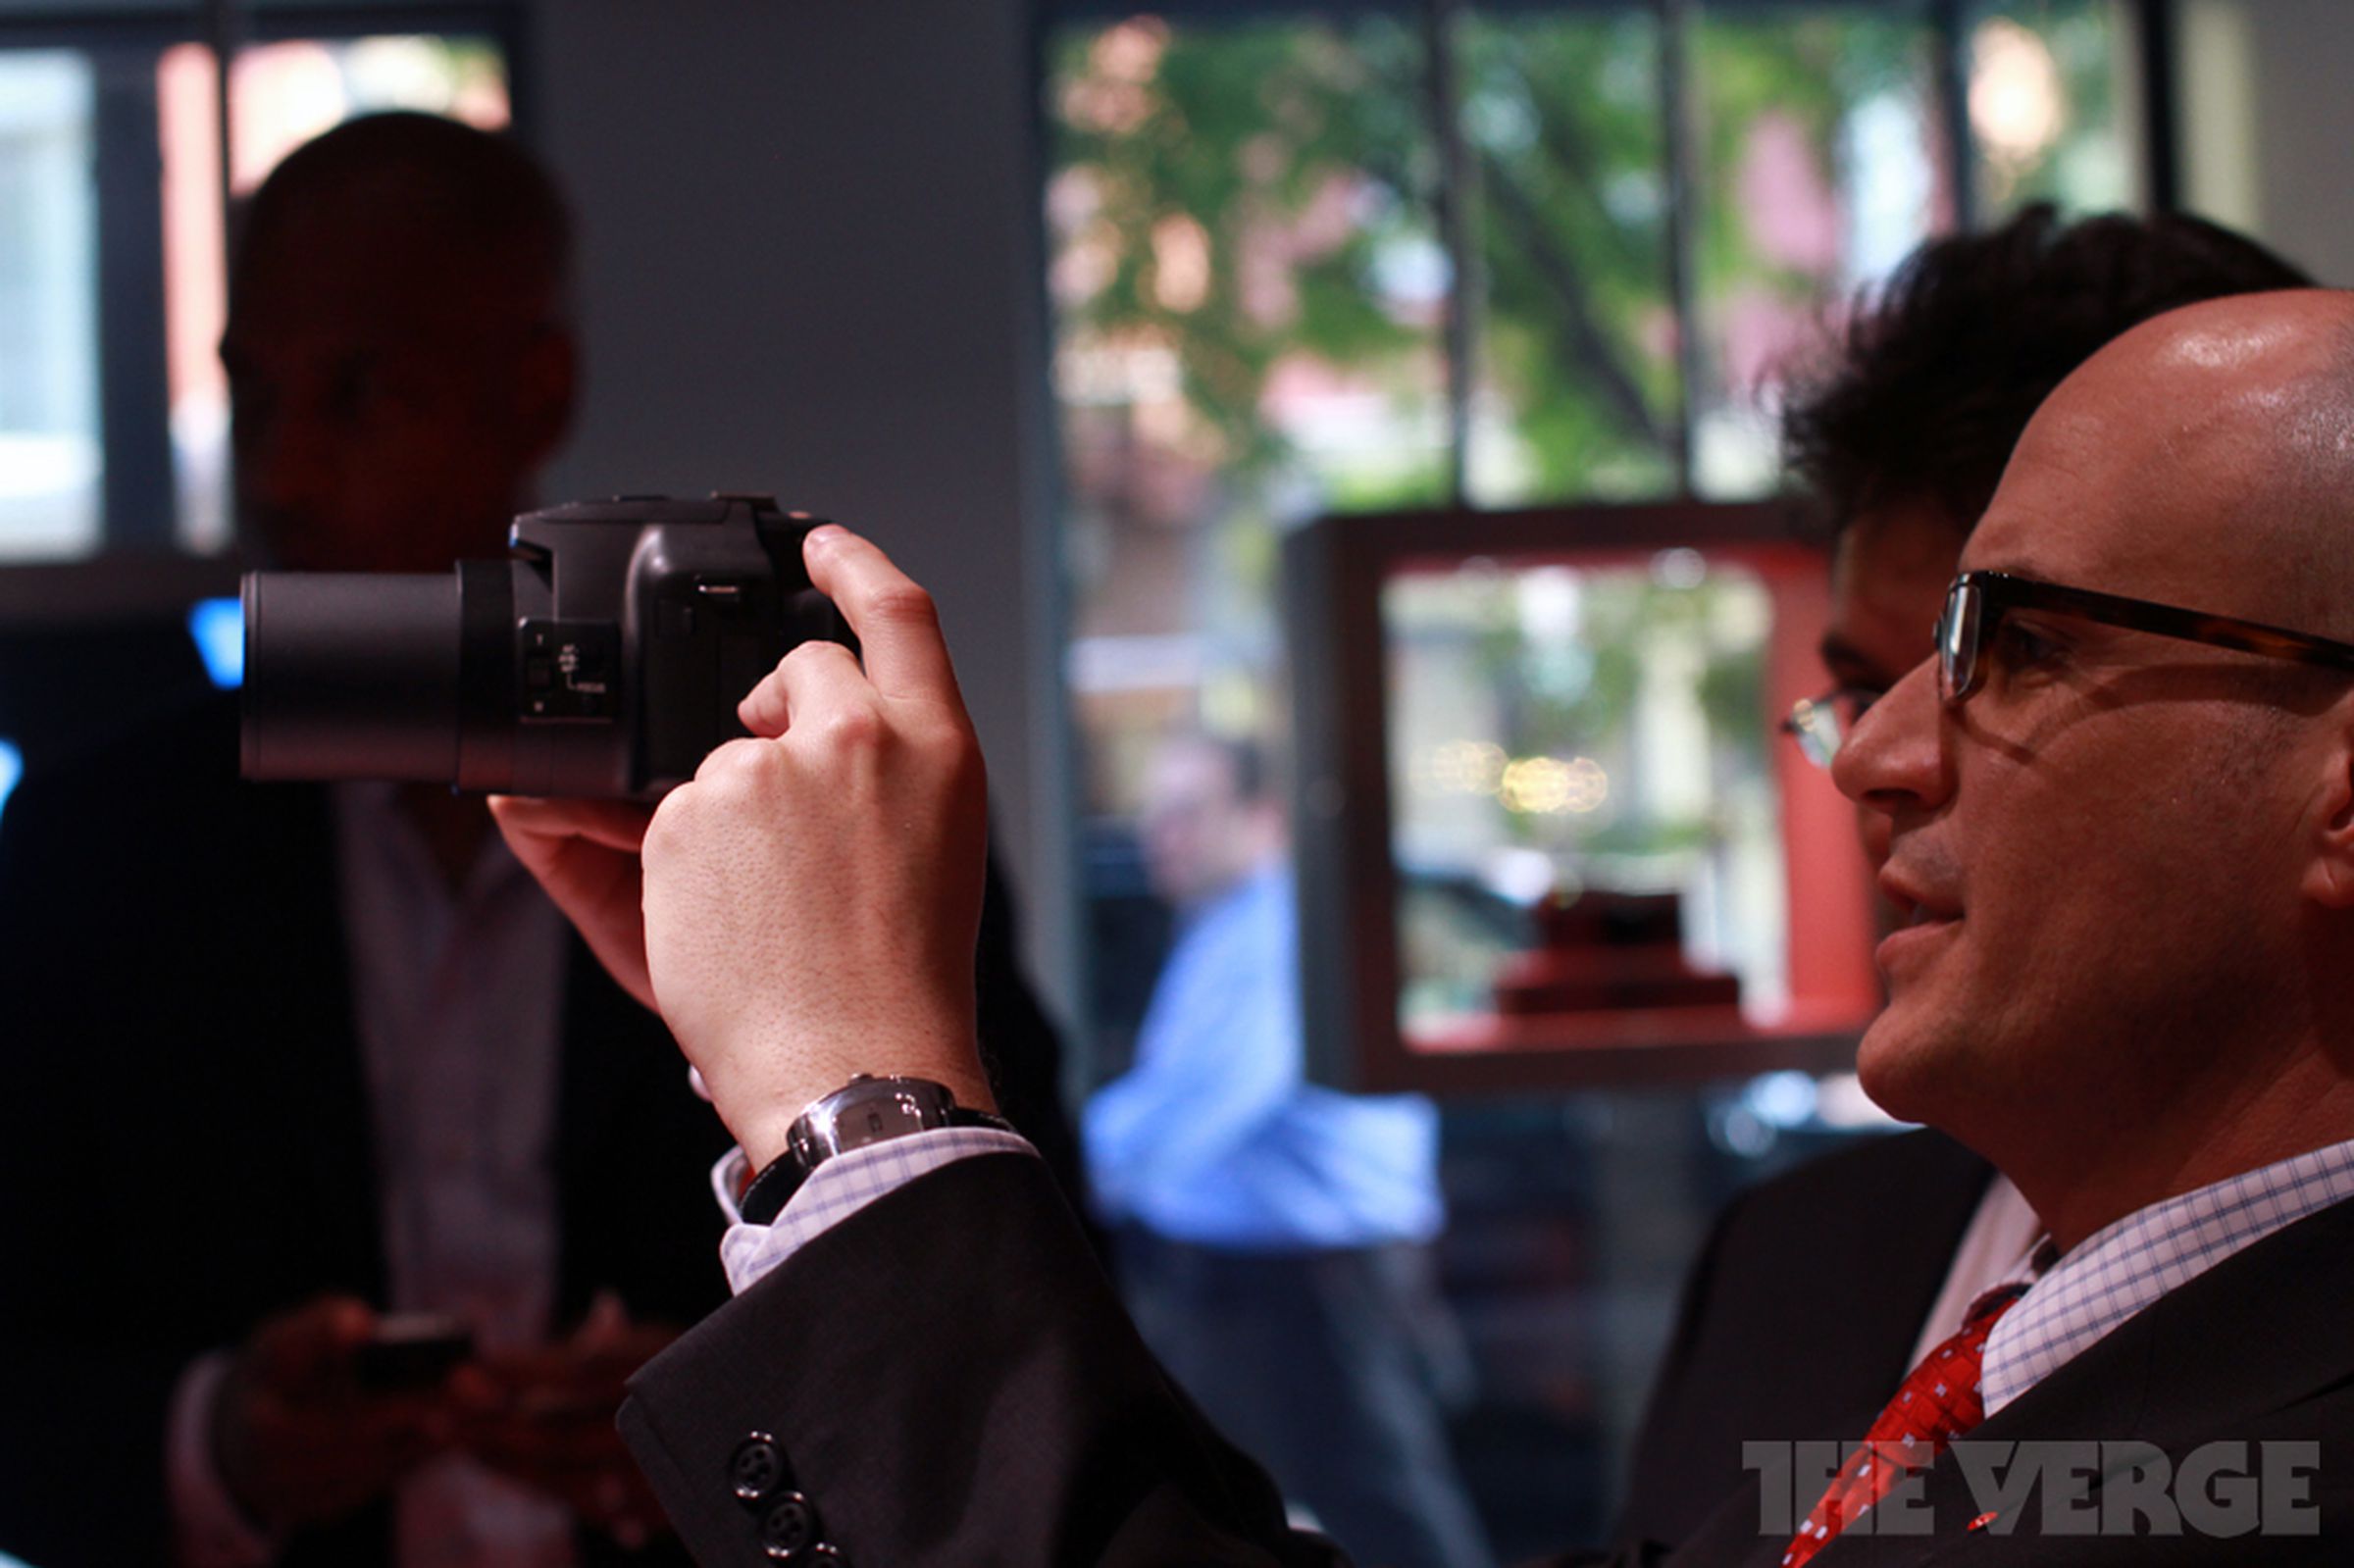 Leica store grand opening in Washington, DC